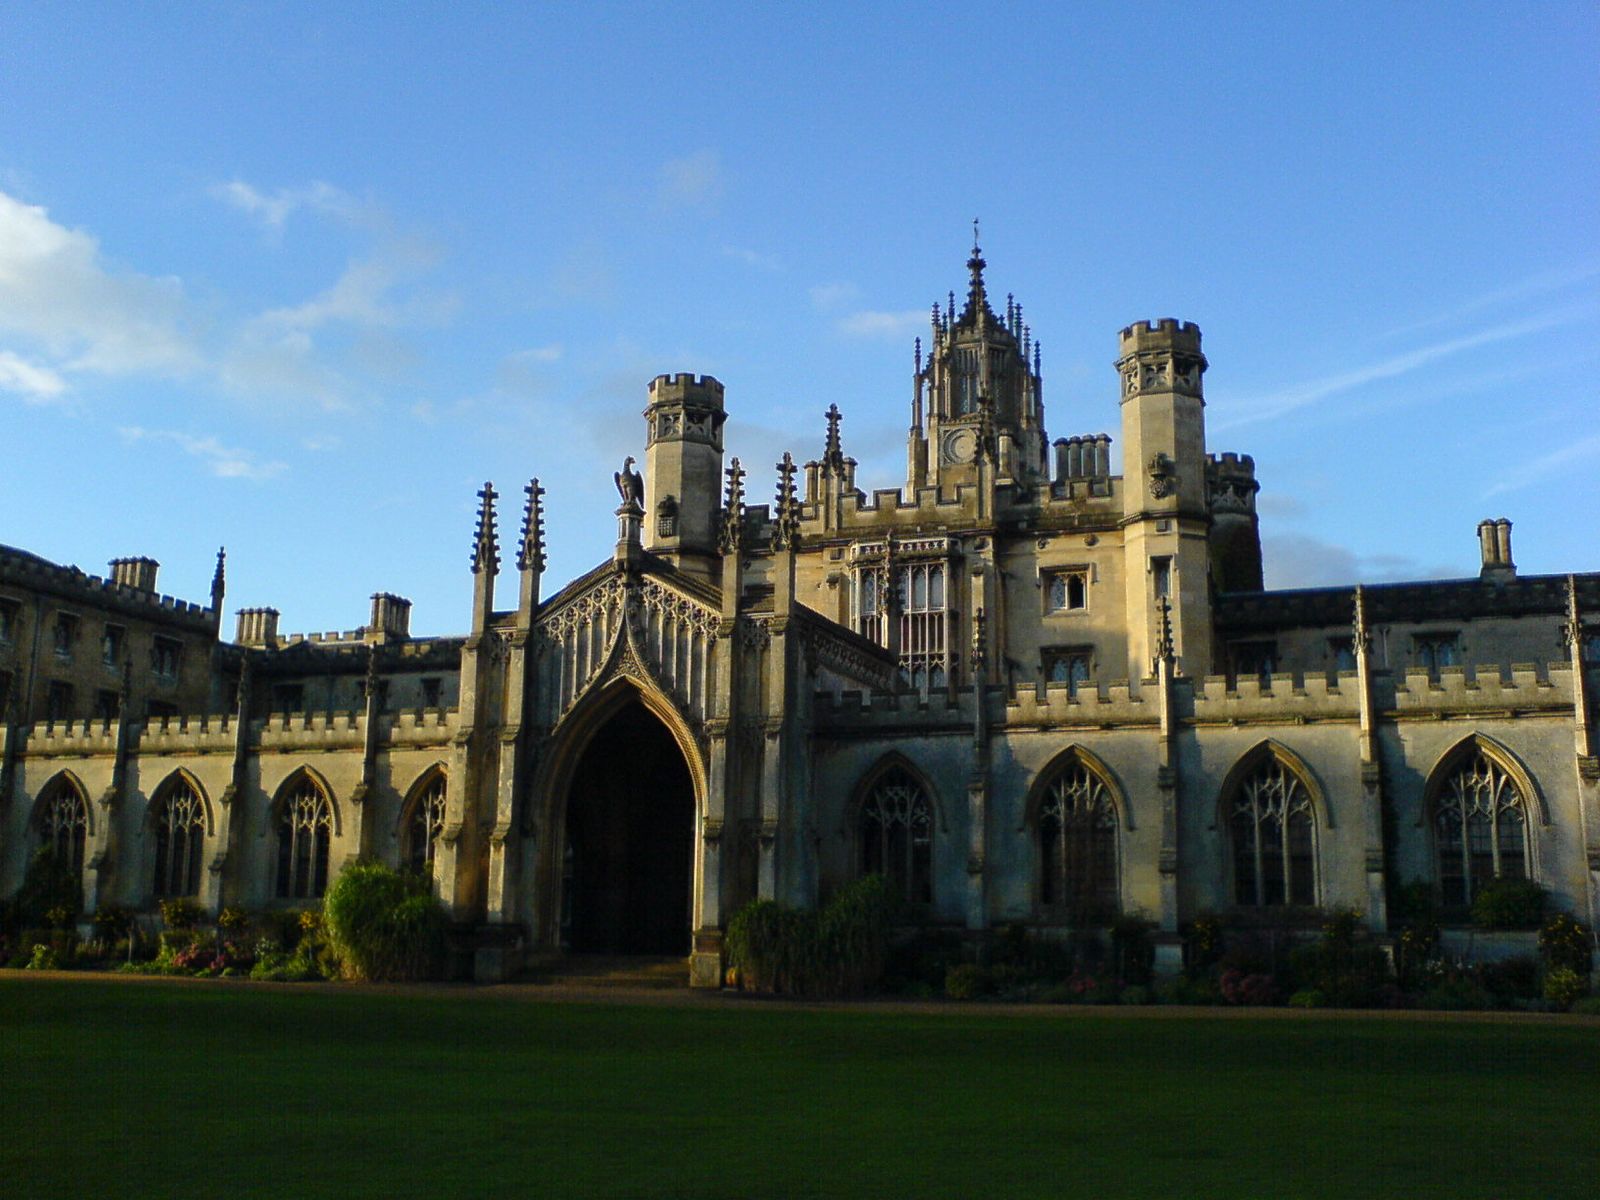 an old, castle - like building is shown in front of blue sky